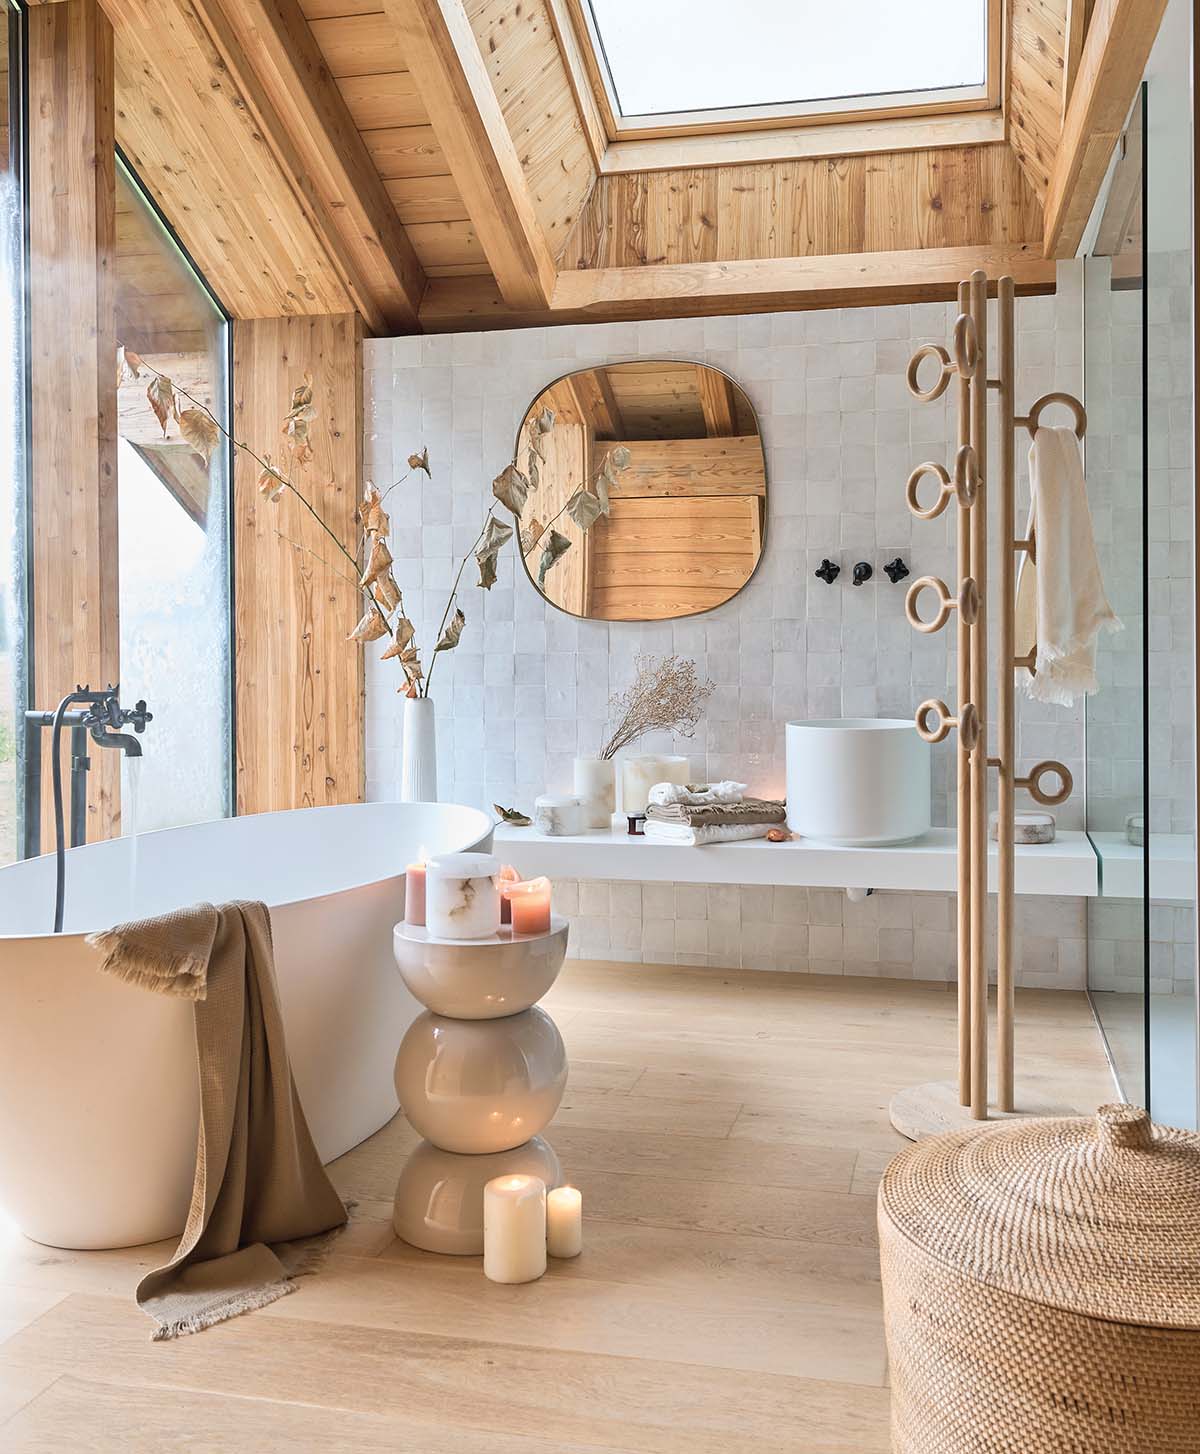 La Redoute bathroom accessories and wood panelling. You're sure-fire ticket to making stylish bathrooms.